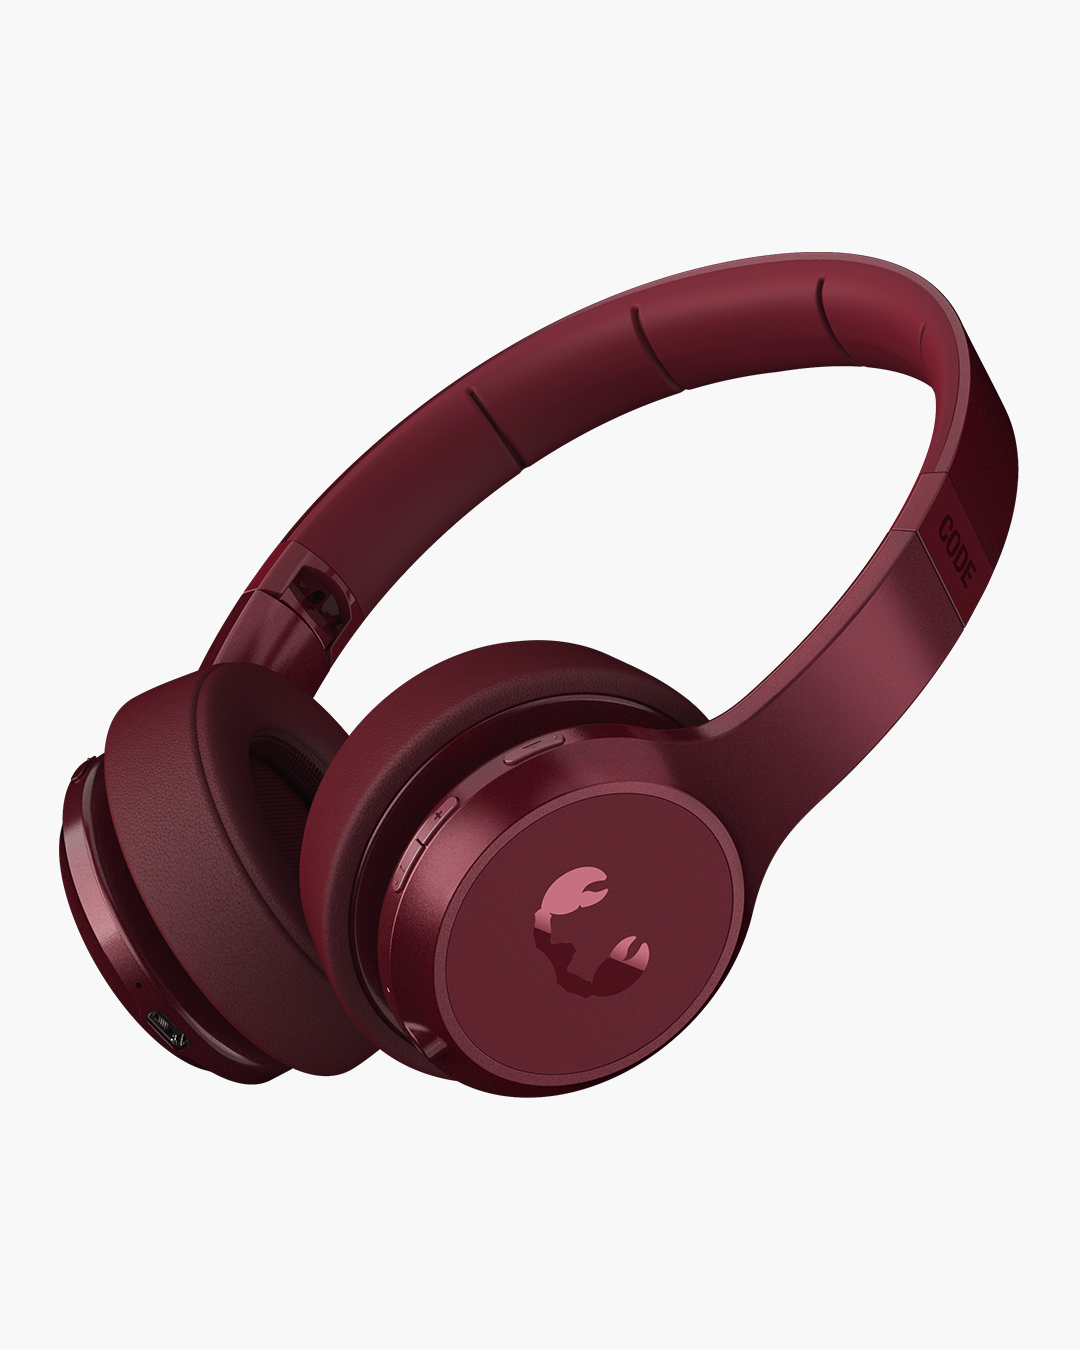 Fresh 'n Rebel - Code ANC - Wireless on-ear headphones with active noise cancelling - Ruby Red